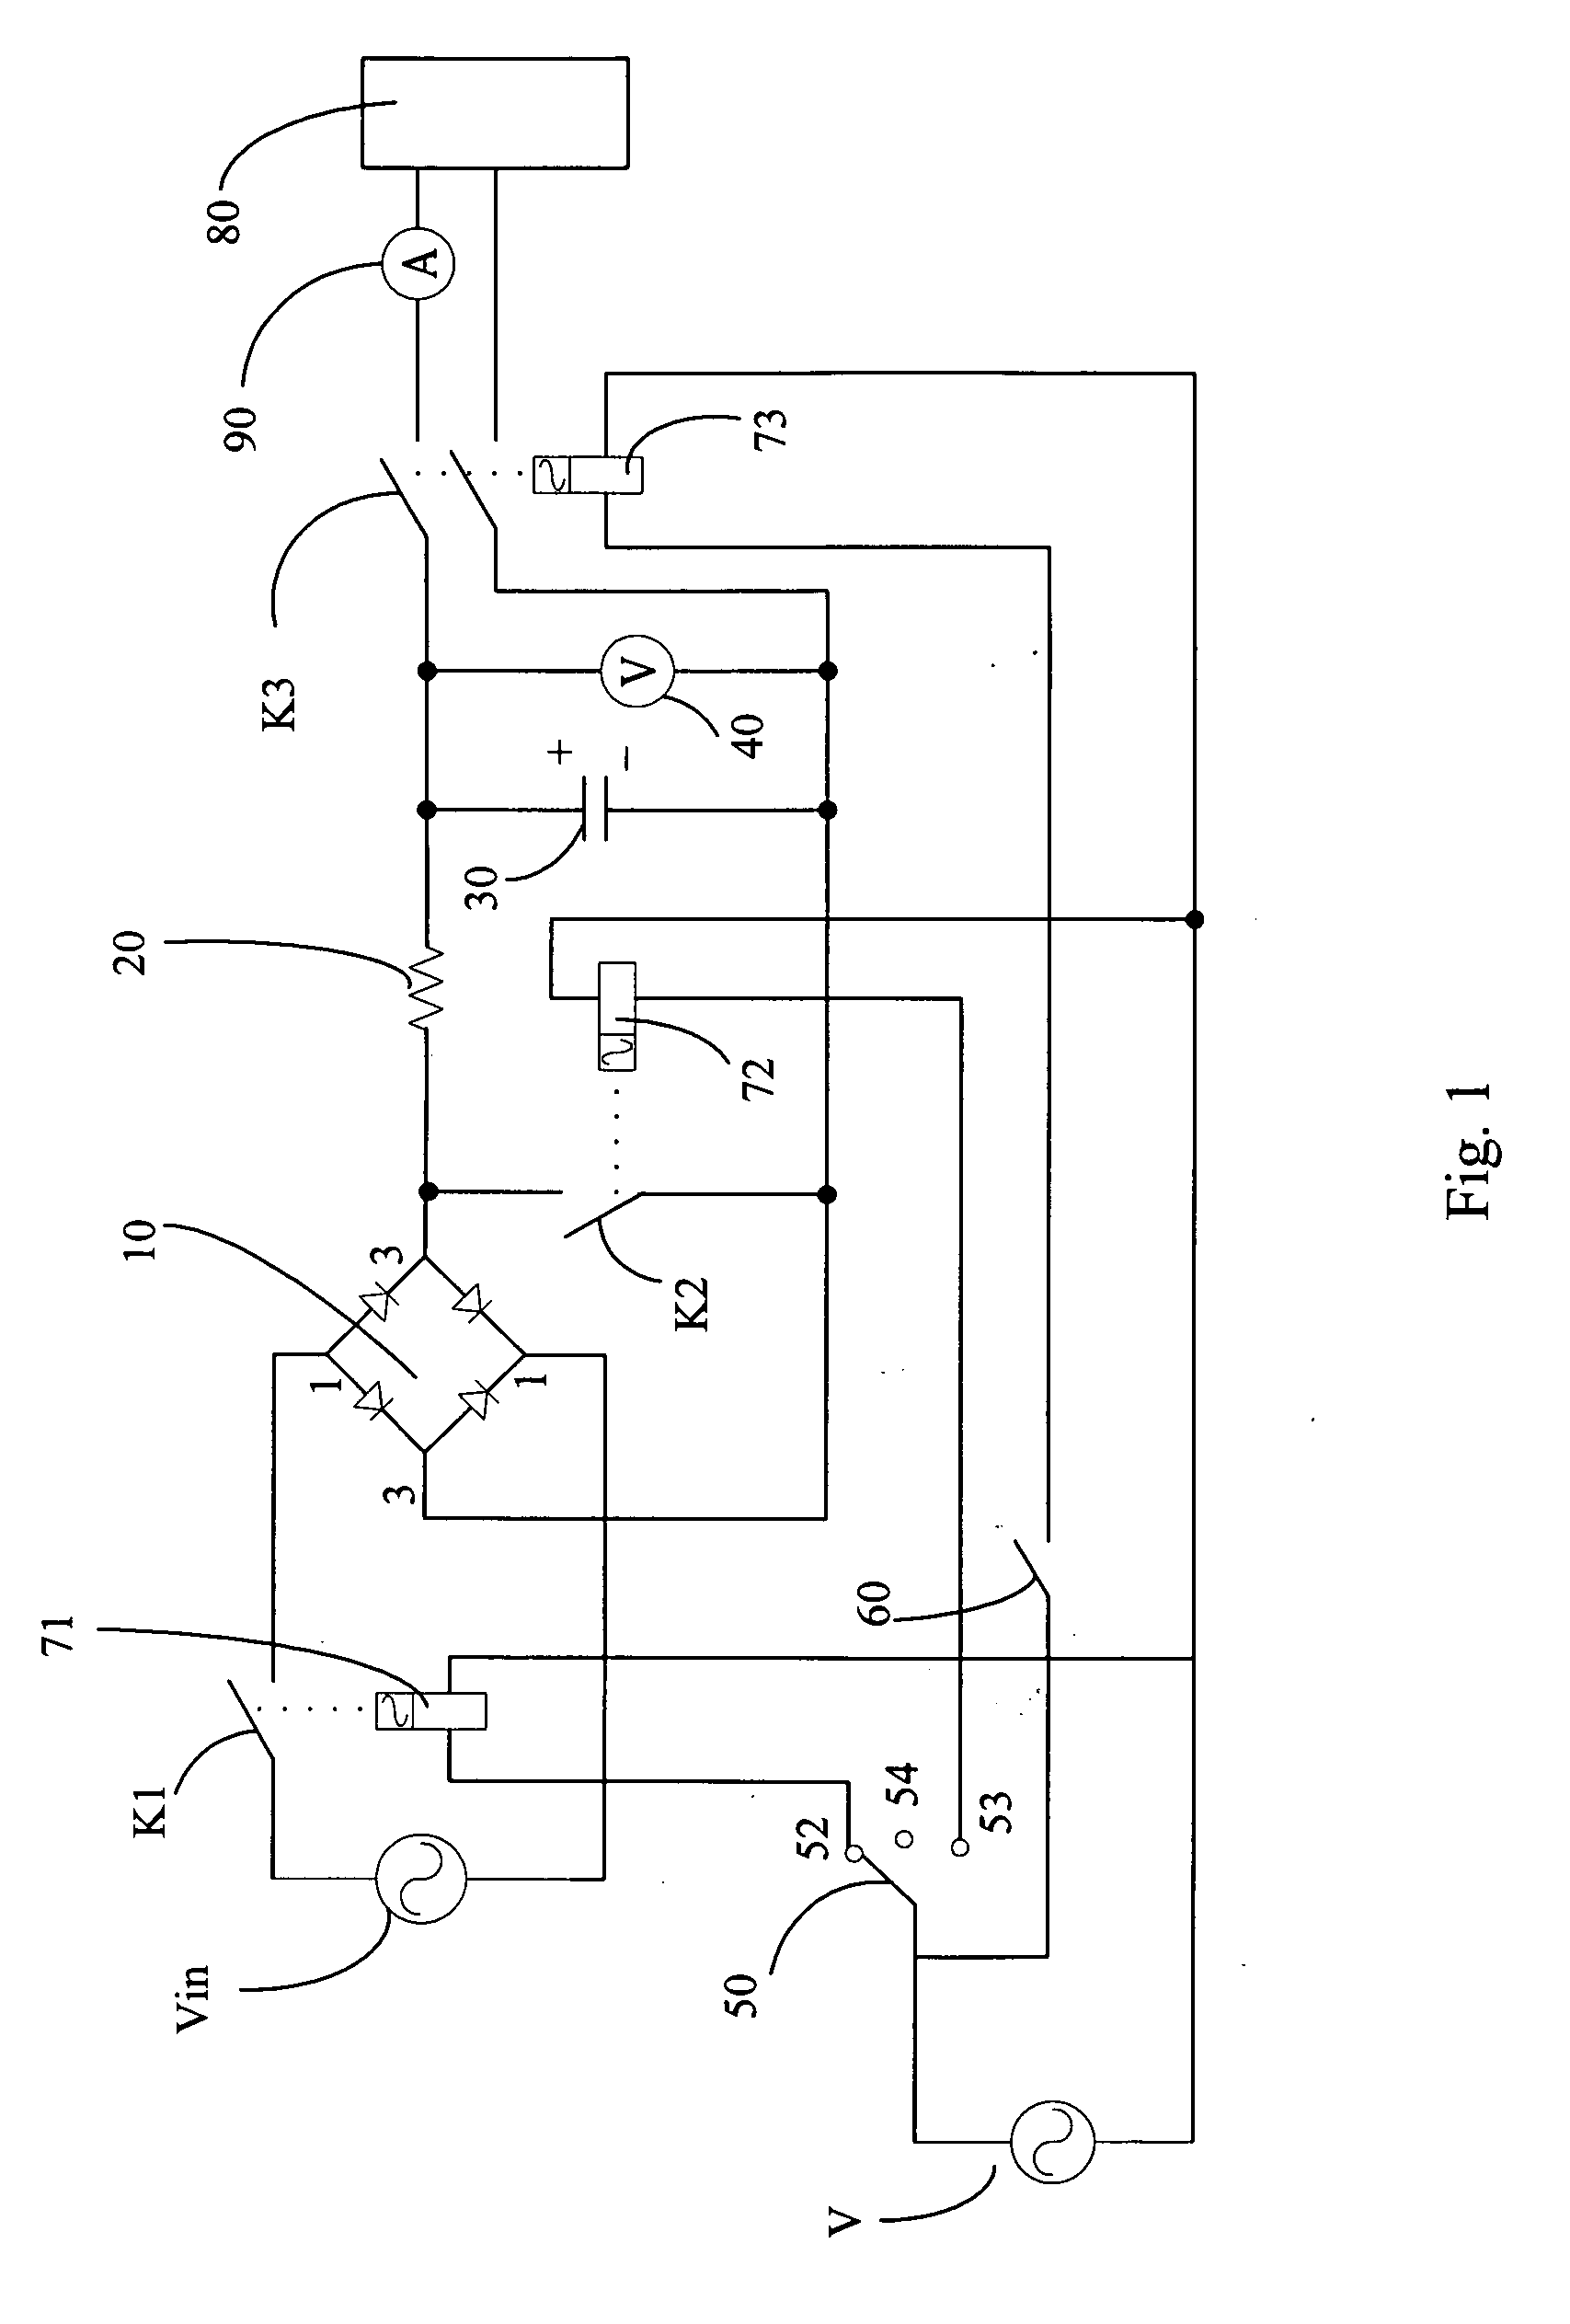 Circuit for testing inrush current